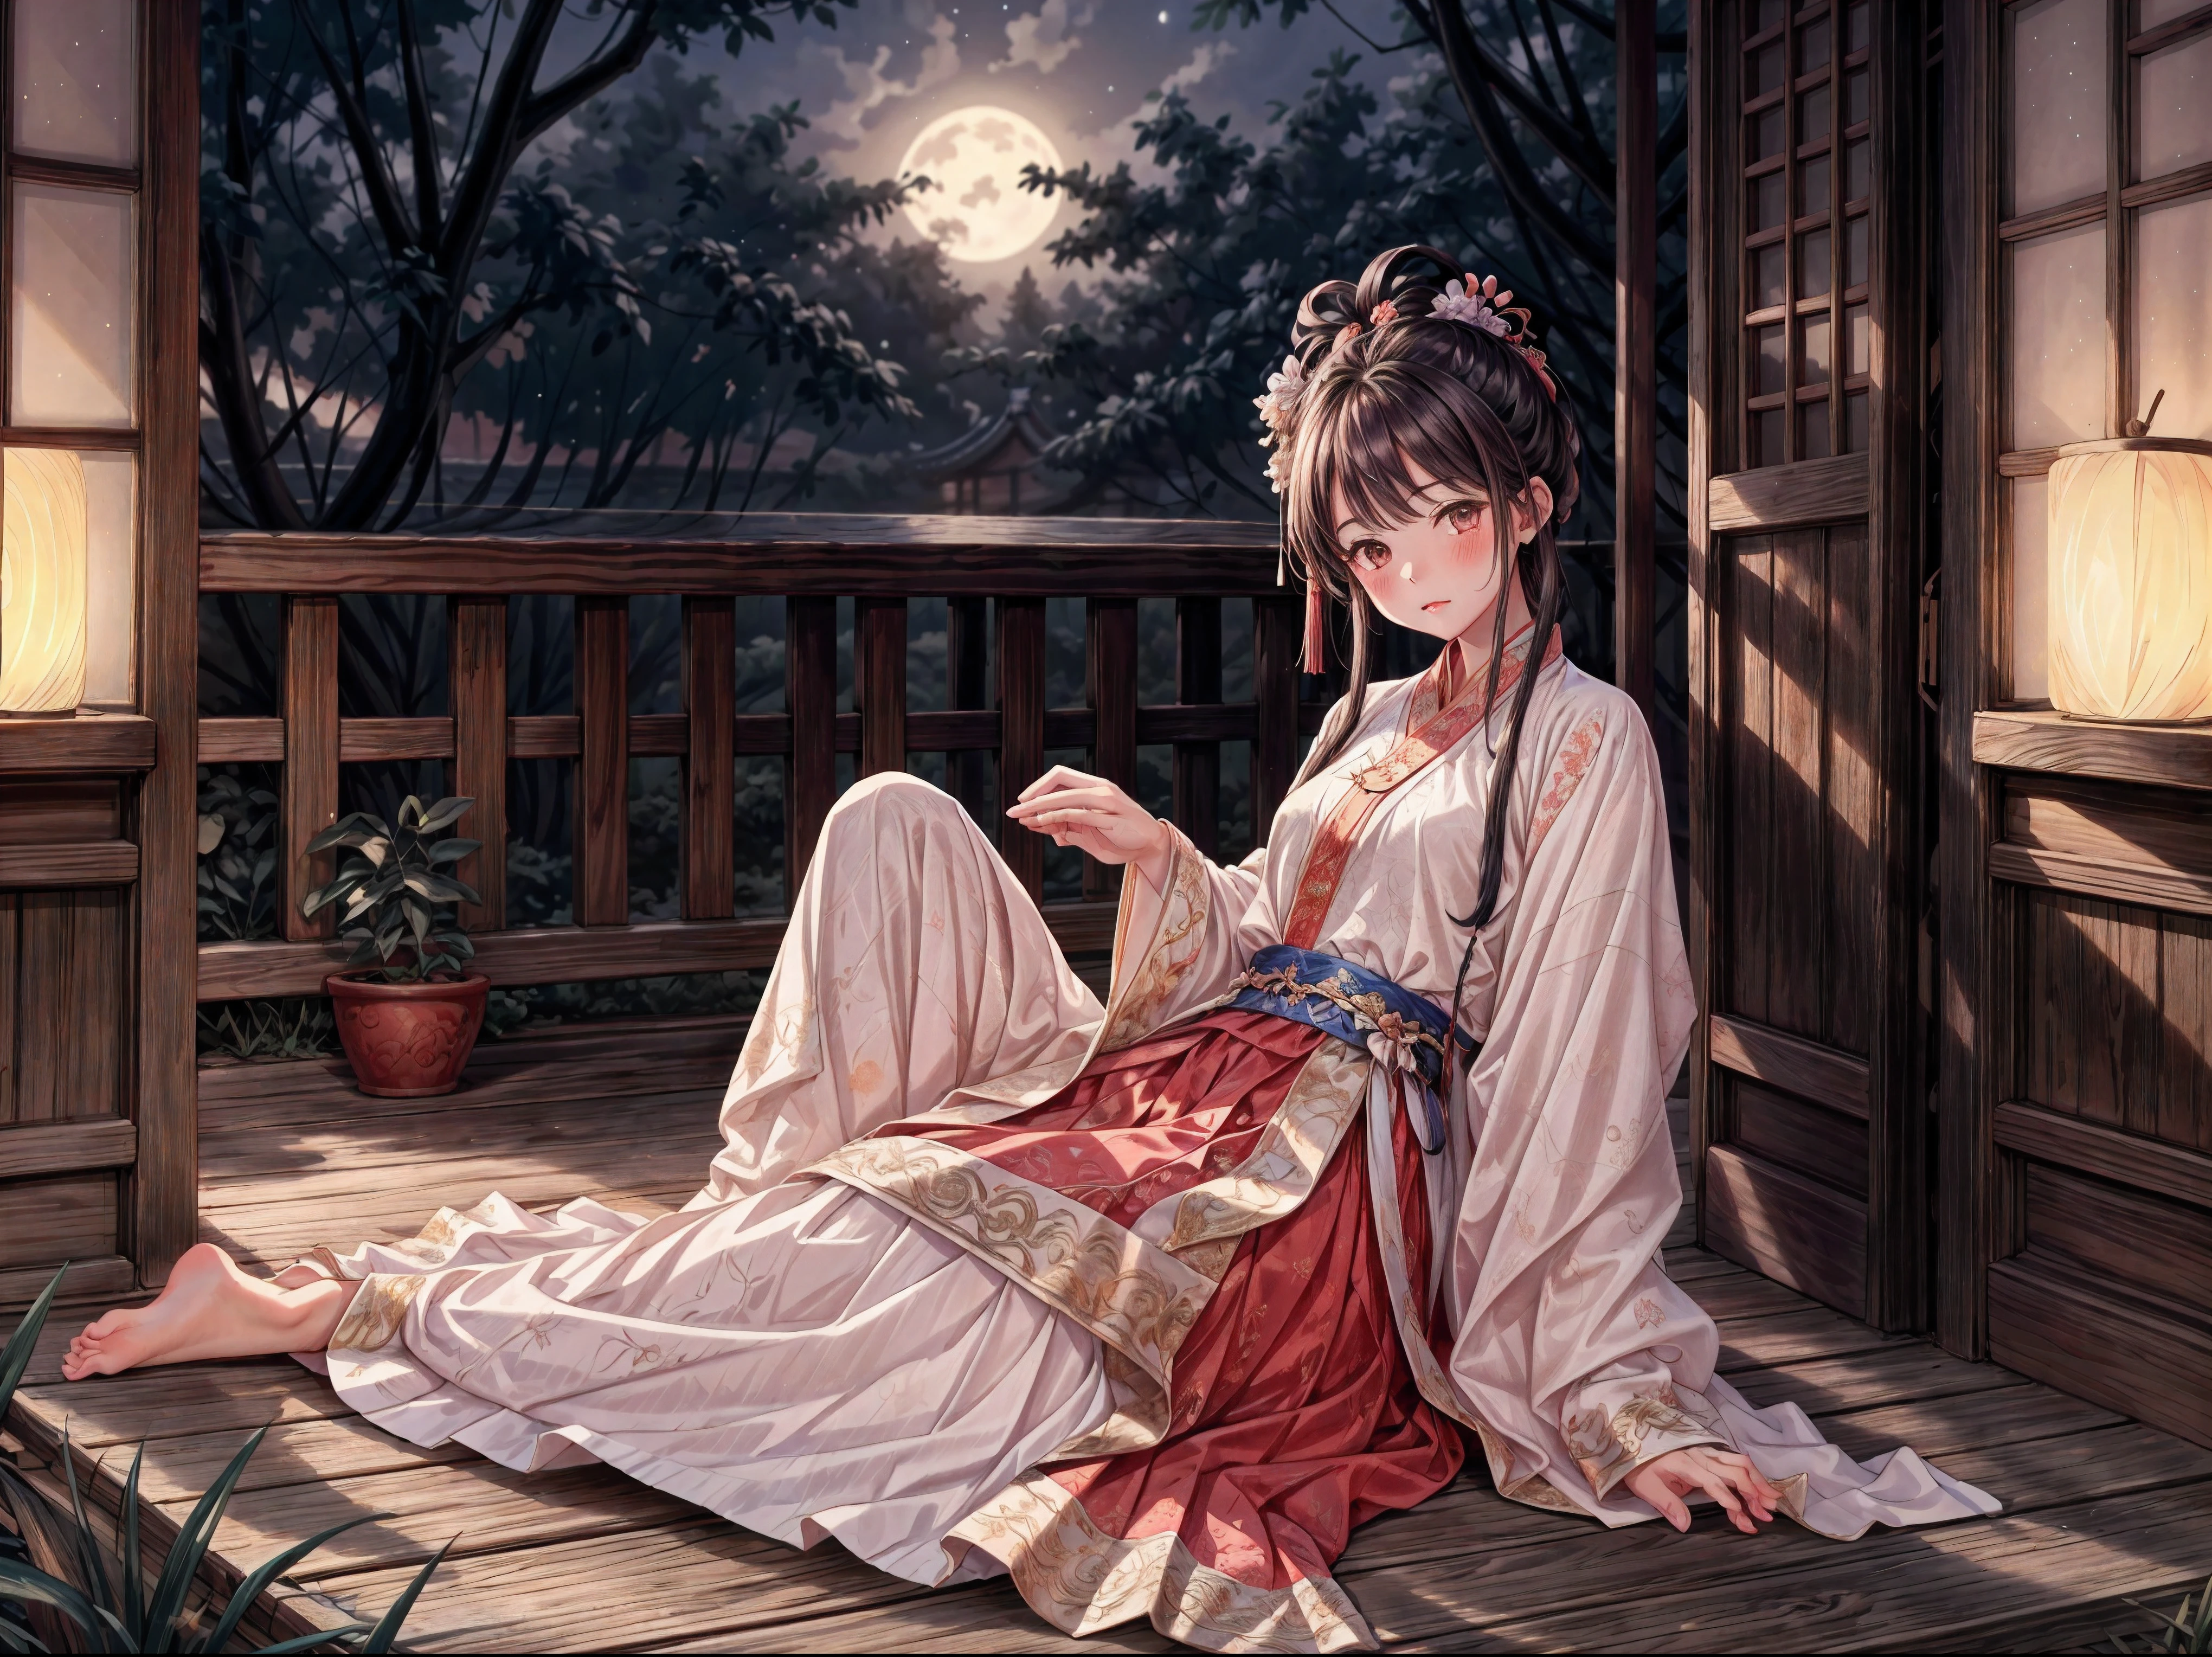 (Ridiculous,Super detailed),(1 girl:1.3),(alone, Hand Painted,simple lines,16-year-old girl wearing red Hanfu,on the bed,barefoot,indoor,moonlight,at night,nose blushing,leave,high resolution,masterpiece),There is a 16-year-old girl in the bedroom under the moonlight，wear (Vibrant red Chinese Hanfu), 躺on the bed. The soft moonlight outside the window illuminates the room，dim light, Create a peaceful atmosphere. Girl&#39;s face is decorated with blush on the nose, Add a touch of innocence and charm. Her attire is beautifully Hand Painted, Showed (intricate details) of traditional clothing. Simple yet elegant lines, Capturing the essence of Hanfu style. Girl is (barefoot), Exudes a feeling of comfort and relaxation. This artwork was created at a ridiculously high resolution，and pay attention to details, Make every stroke and fine line clearly visible. The composition is a masterpiece, Reflects the skill and artistry of the creator. The perspective is from the girl&#39;s point of view, Let the audience immerse themselves in her world. This prompt is intended to generate a (Super detailed, high resolution images) Capture the beauty and serenity of a moonlit night in a traditional Chinese style setting.